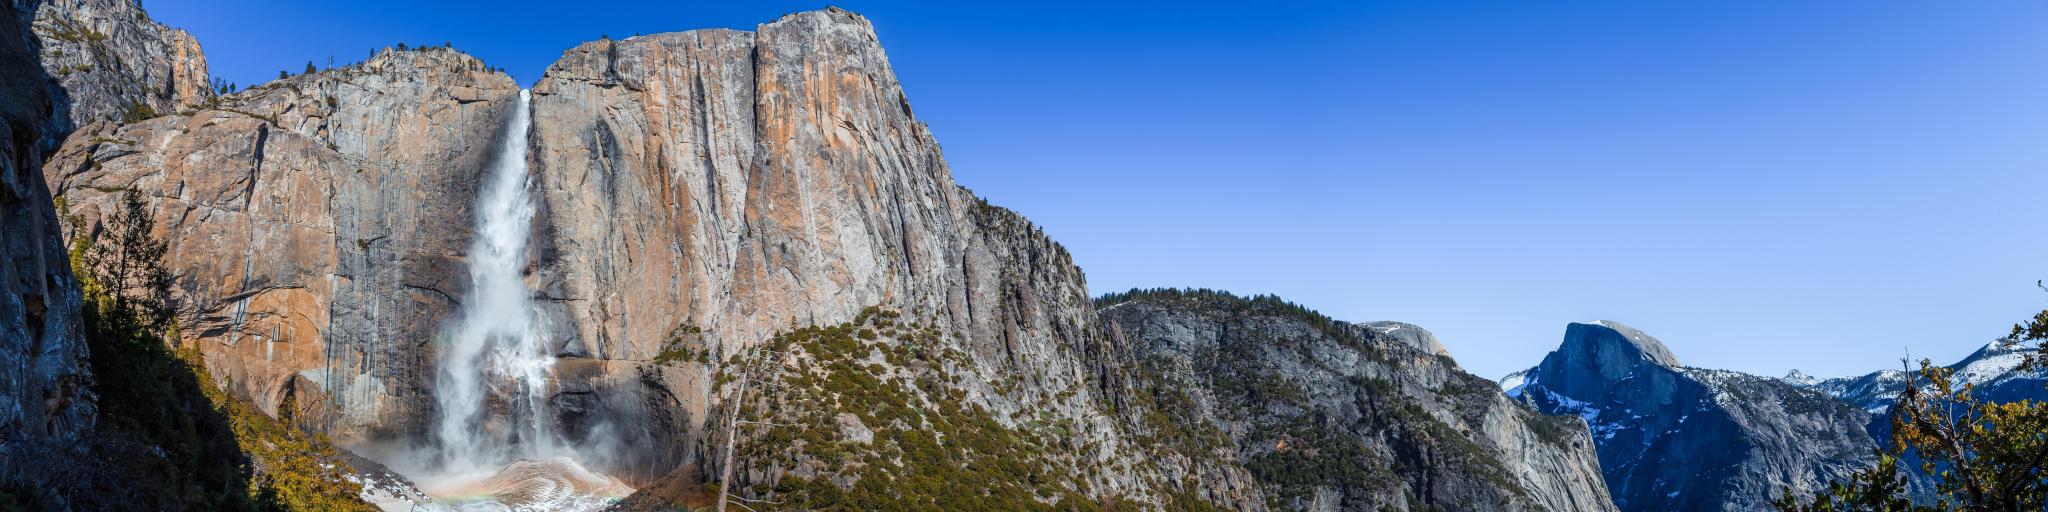 Panoramic view from Upper Yosemite Falls Trial, with Yosemite Falls in the background